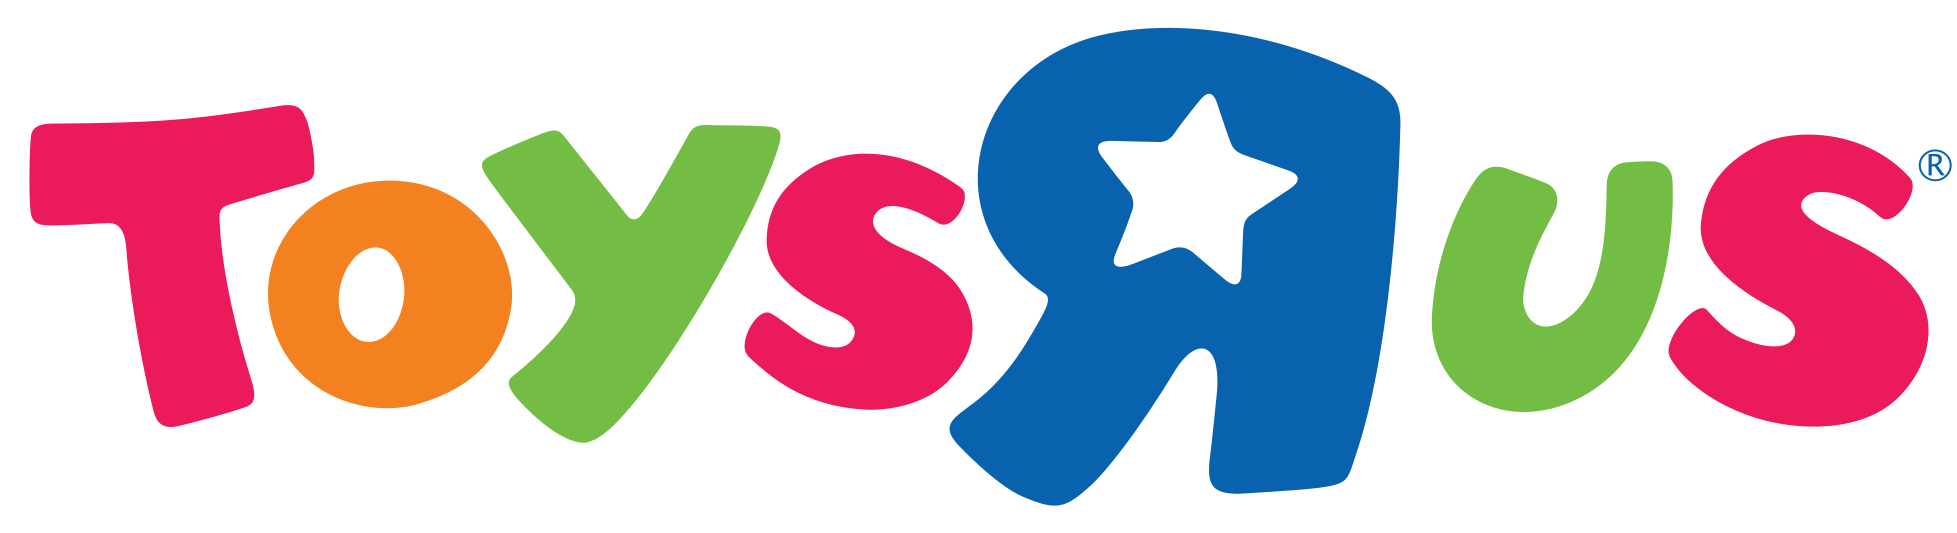 Toys R Us Gift Card, (2000x552)